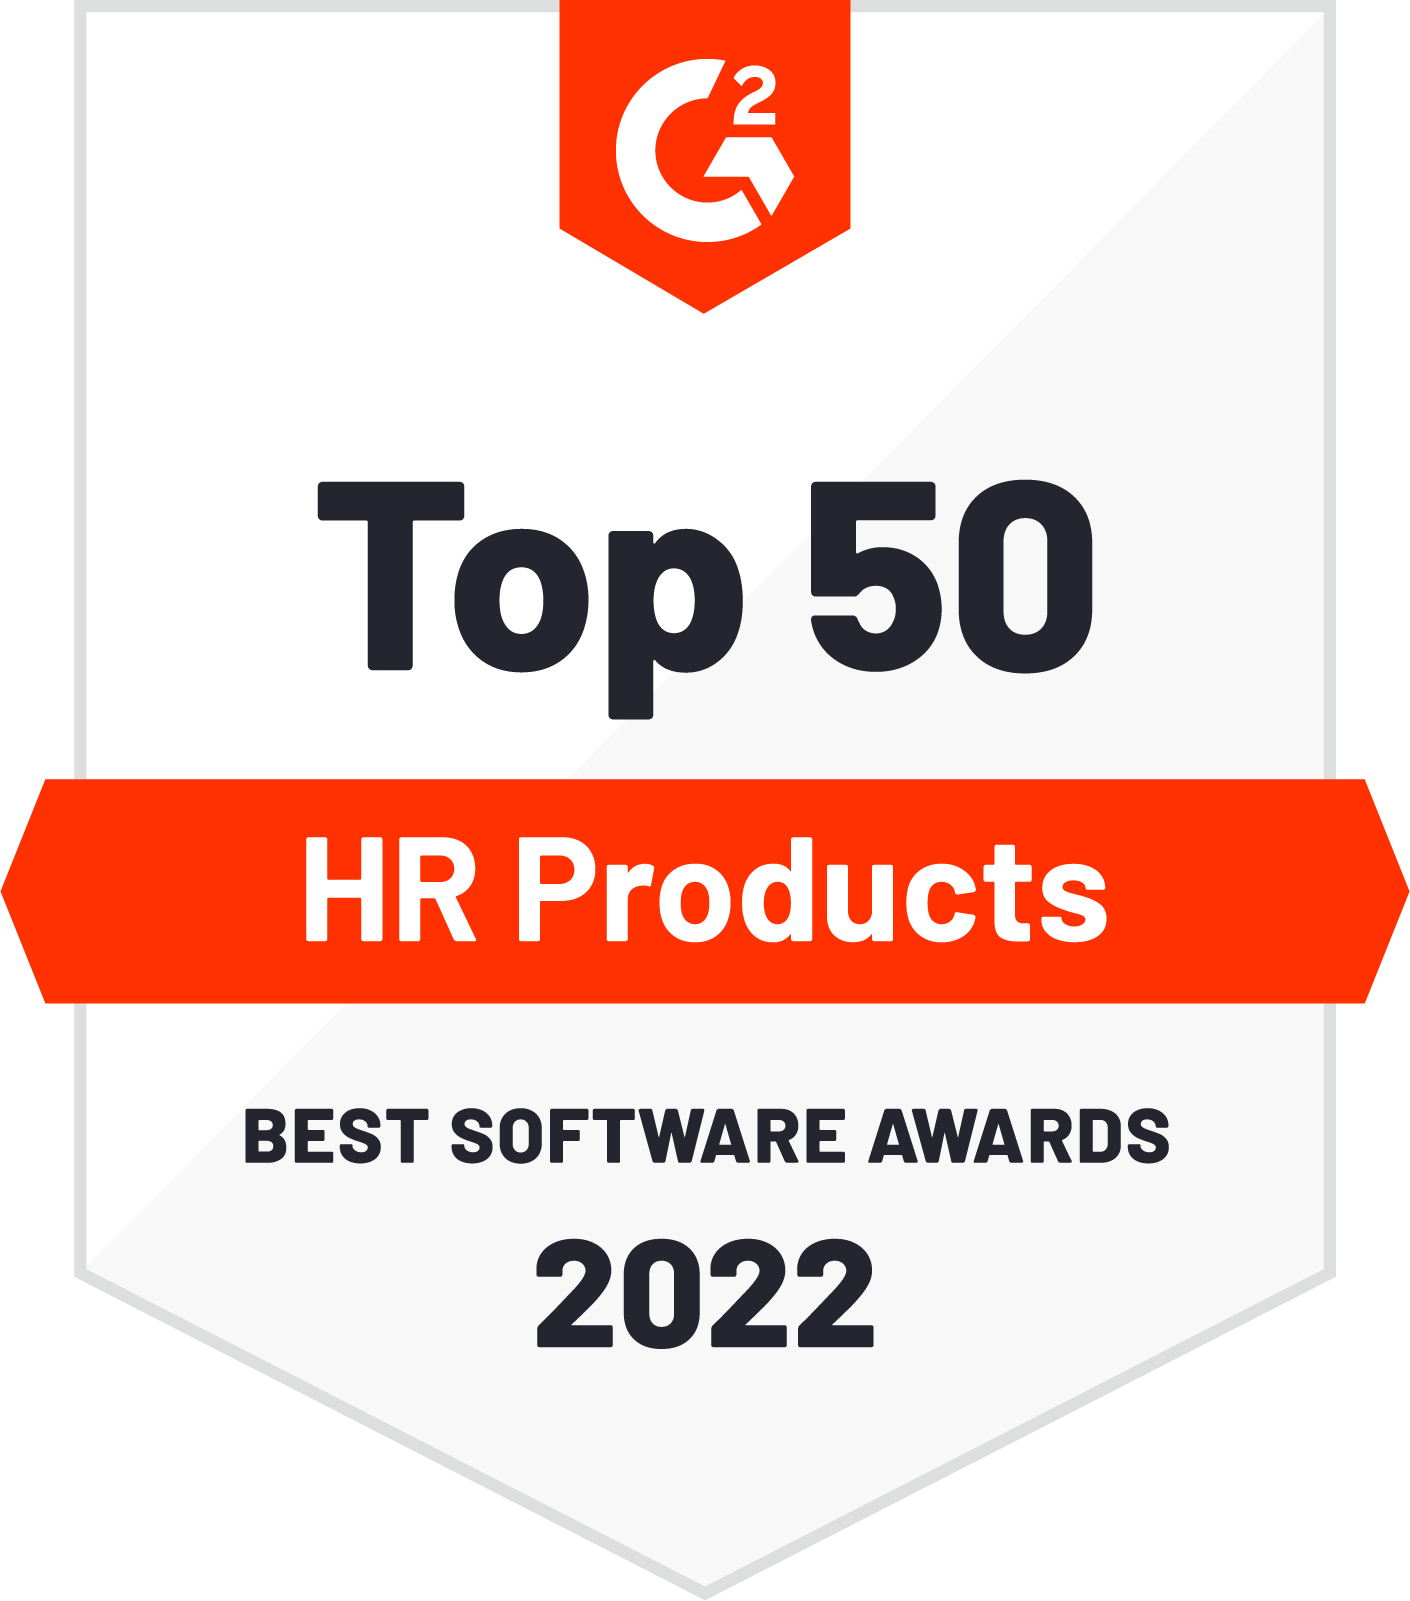 G2 Top 50 HR Products Best Software Awards 2022 Badge